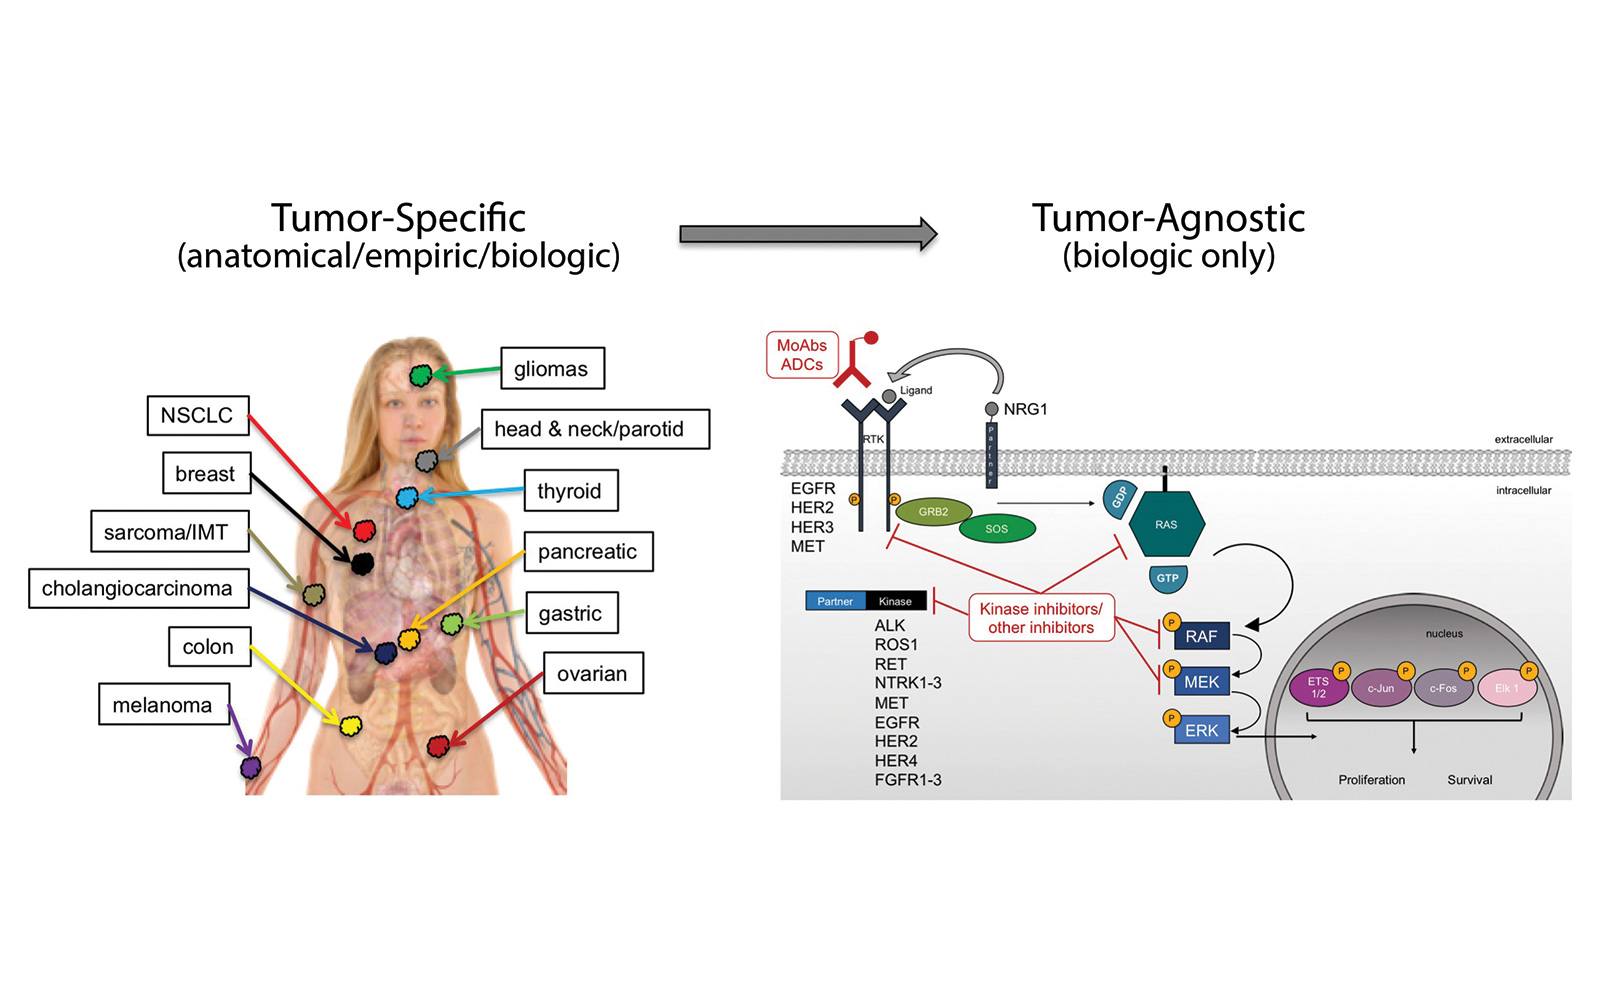 Lung Cancer Leading the Charge for Tumor-Agnostic Targeted Therapies